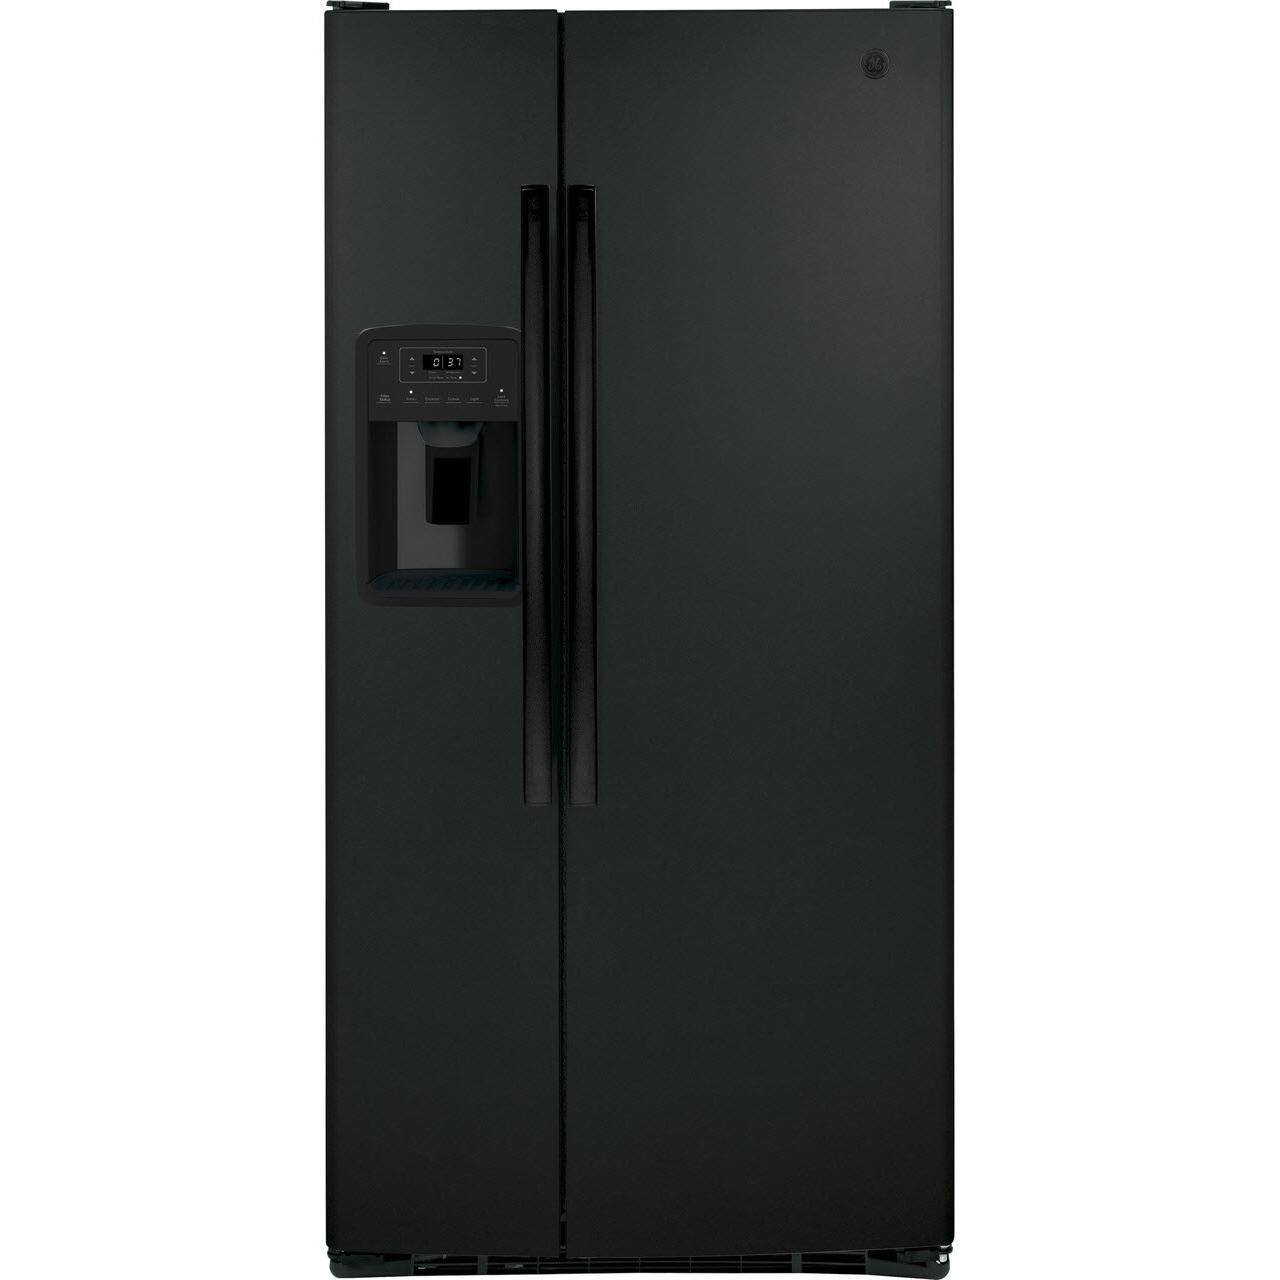 GE 33-inch 23 cu.ft. Freestanding Side-by-Side Refrigerator with LED Lighting GSE23GGPBB